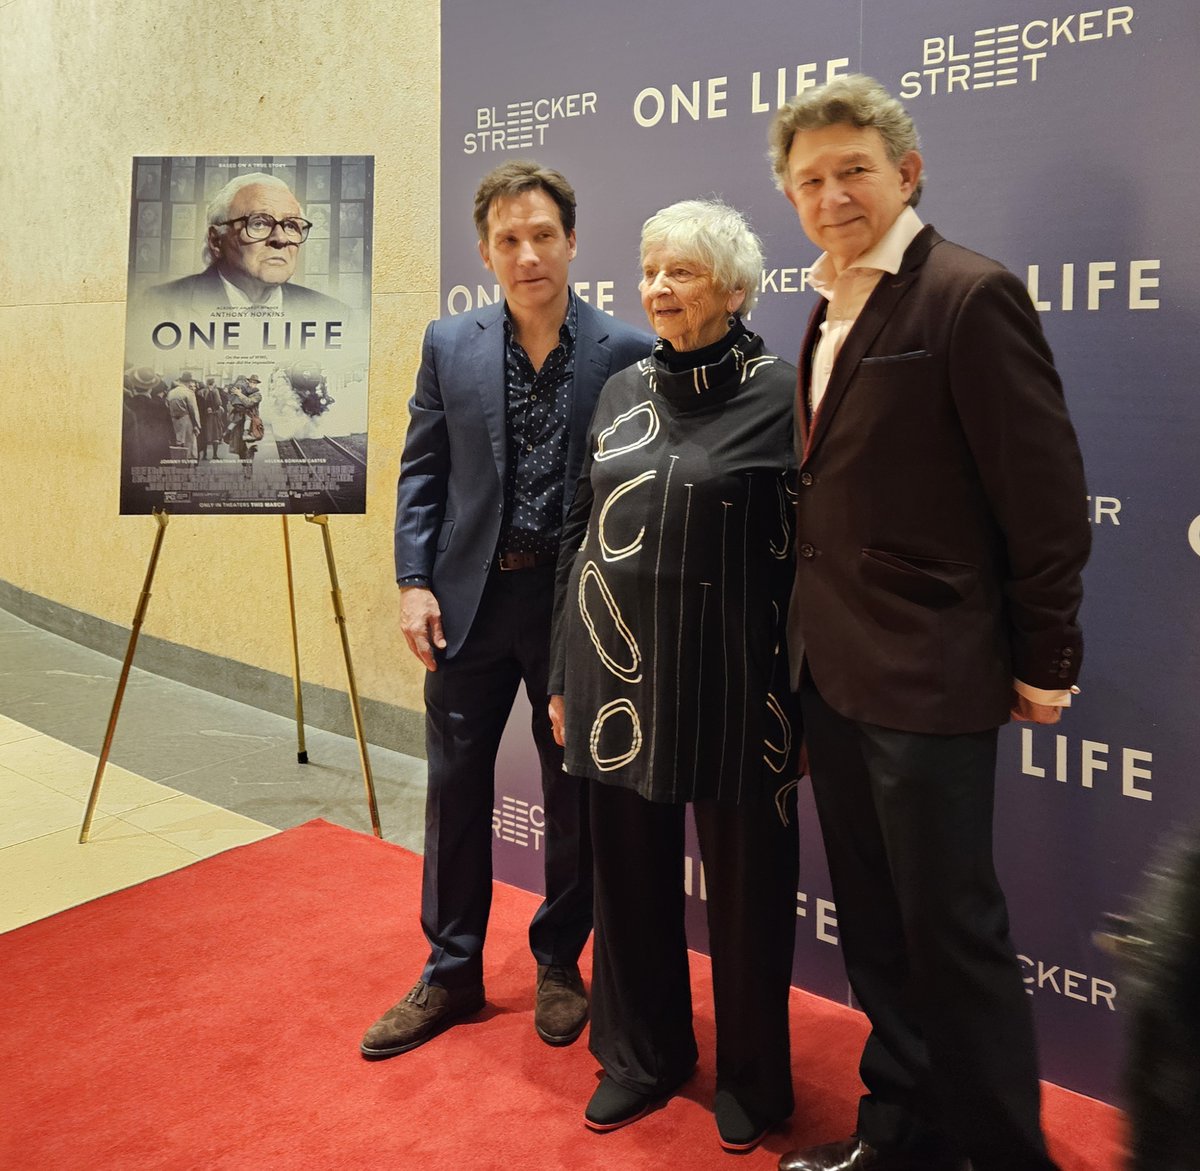 As One Life, the film on Sir Nicholas Winton and the Kindertransports from Prague has screenings in advance of opening March 15 across the USA, the KTA is there! NYC @MJHnews with Kind Eva, director James & Nick Winton. #Kindertransport